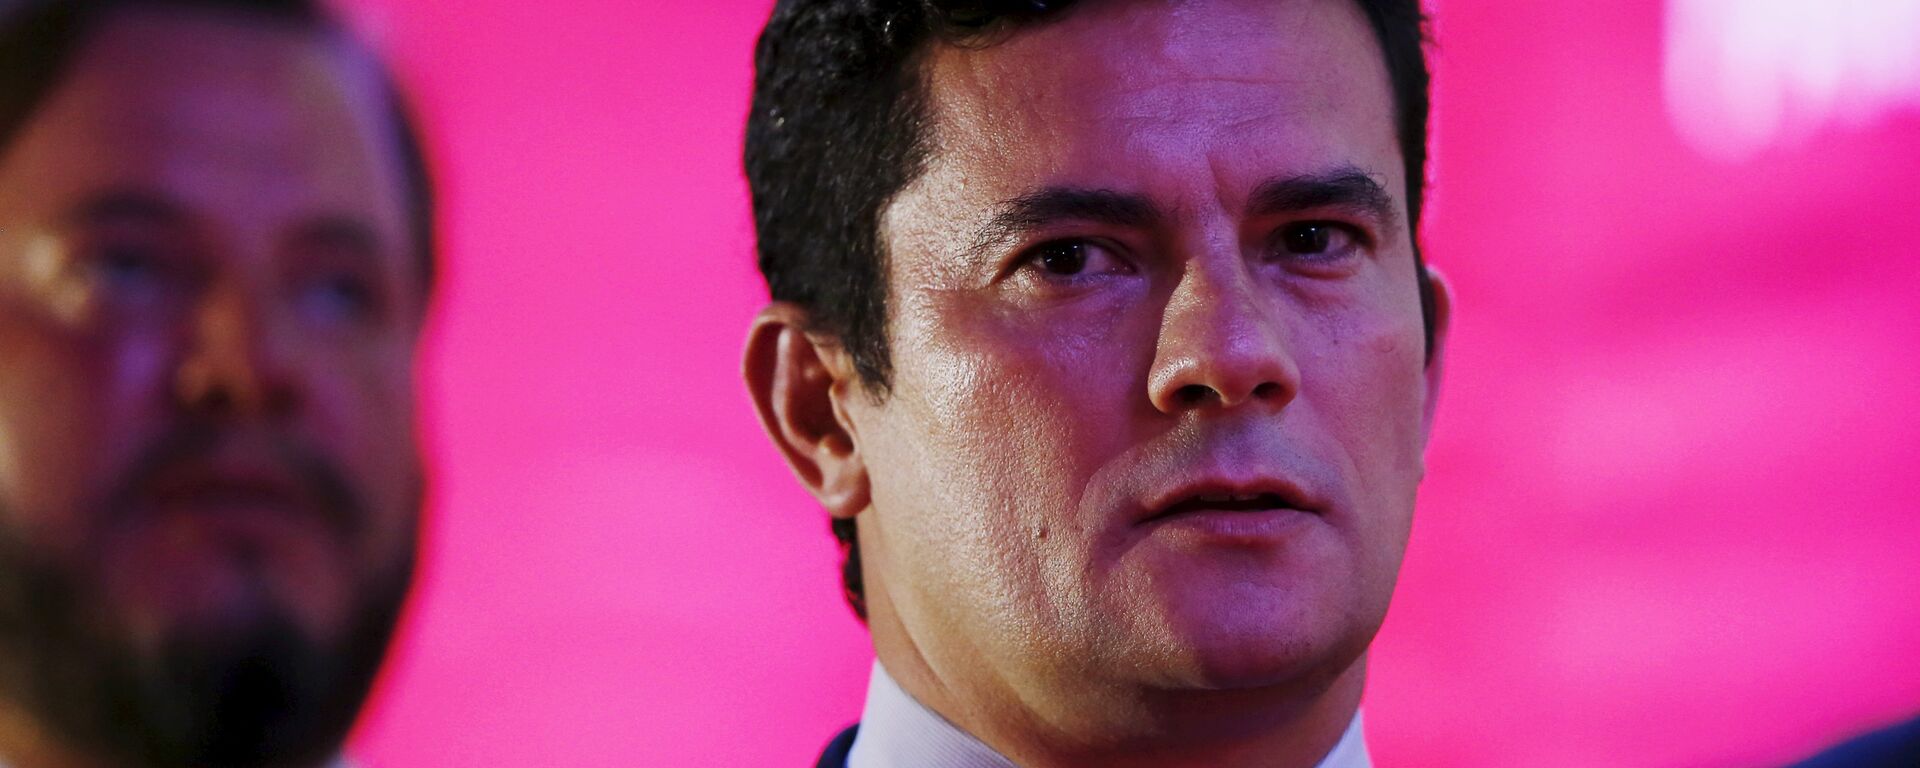 Federal Judge Sergio Moro arrives to a meeting with businessmen in Curitiba, Brazil, March 9, 2016.  - Sputnik Mundo, 1920, 31.03.2022